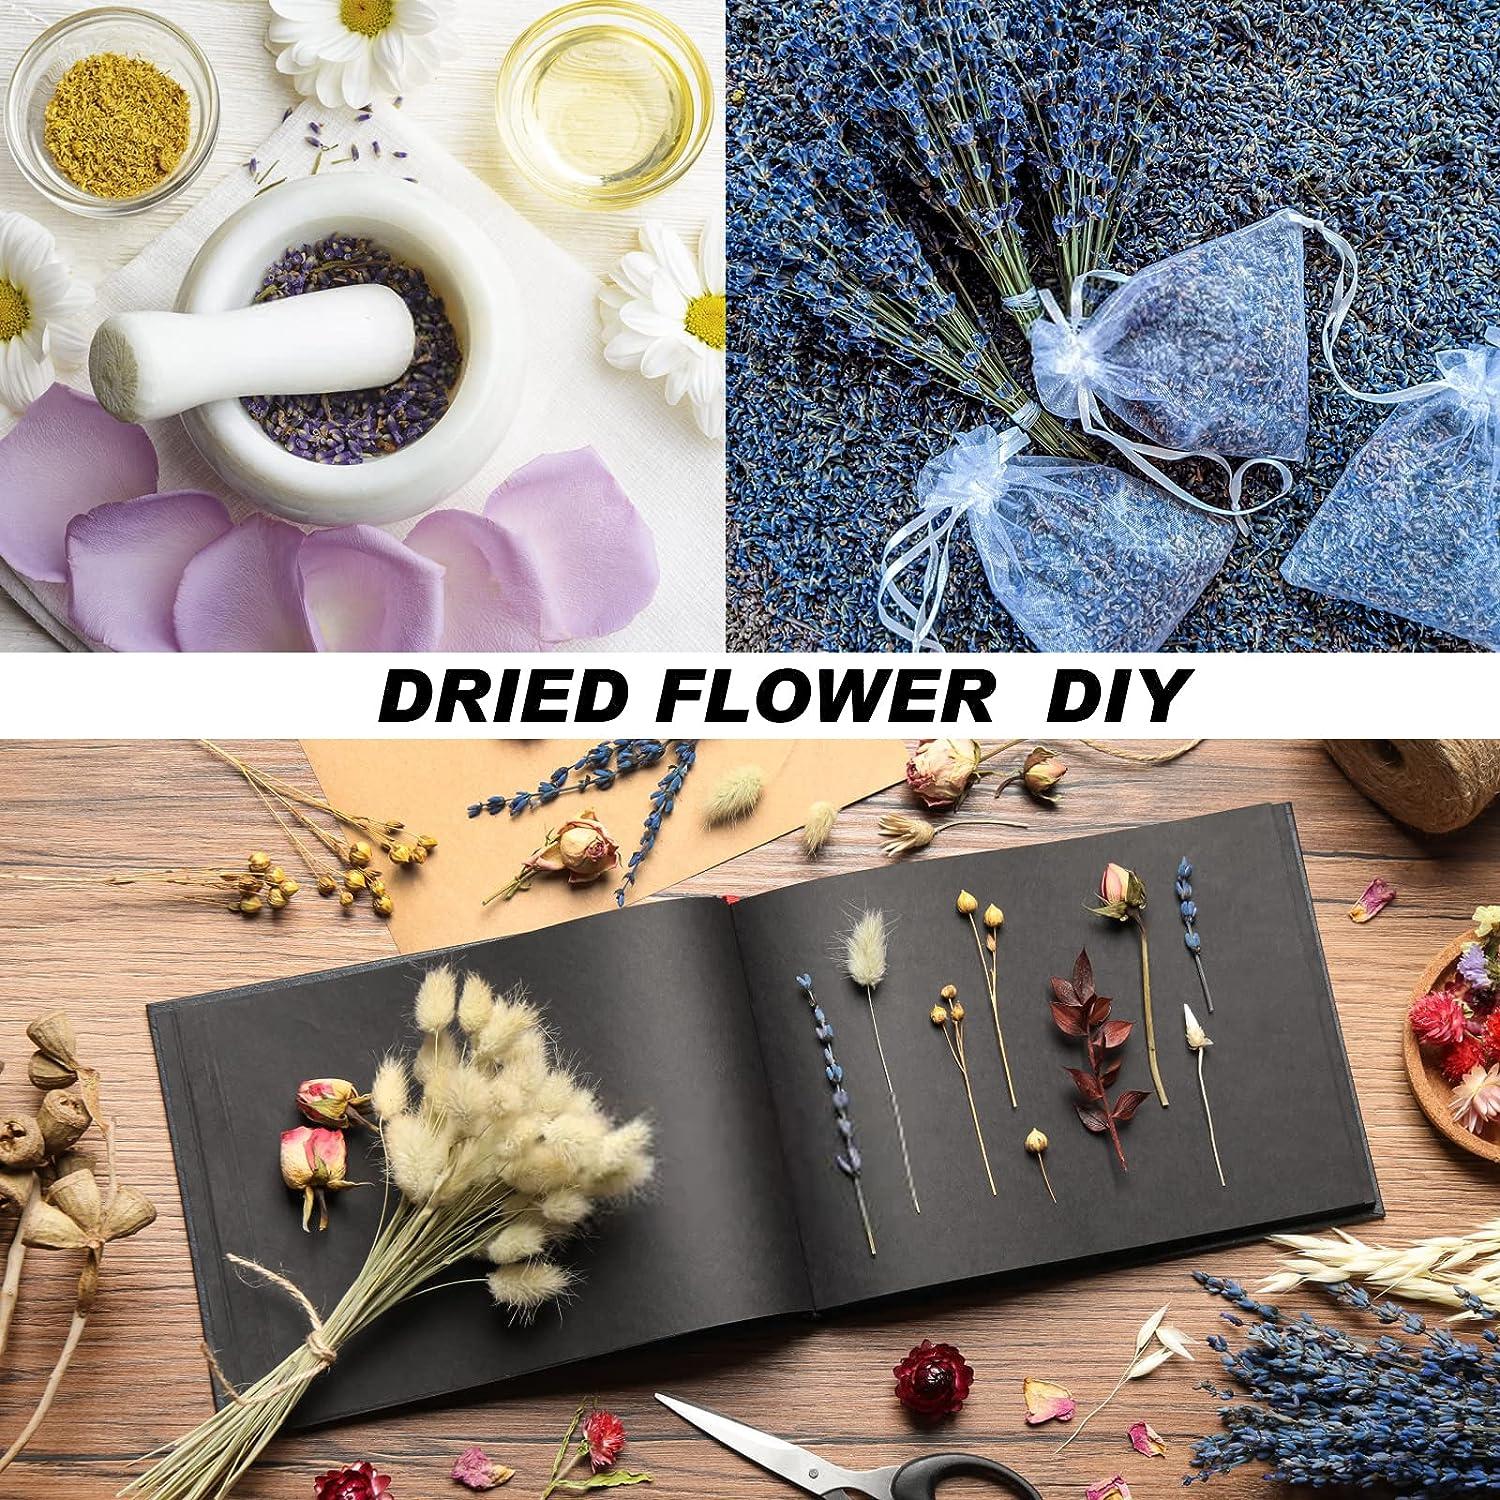  Natural Dried Flowers Herbs Kit (12 Bags), Bulk Dry for Soap  Making, DIY Candle, Resin Jewelry, Decor or Bath, Including Lavender, Rose  Petals, Jasmine, Rosebuds, Lily, Lemon and More, Multicolor